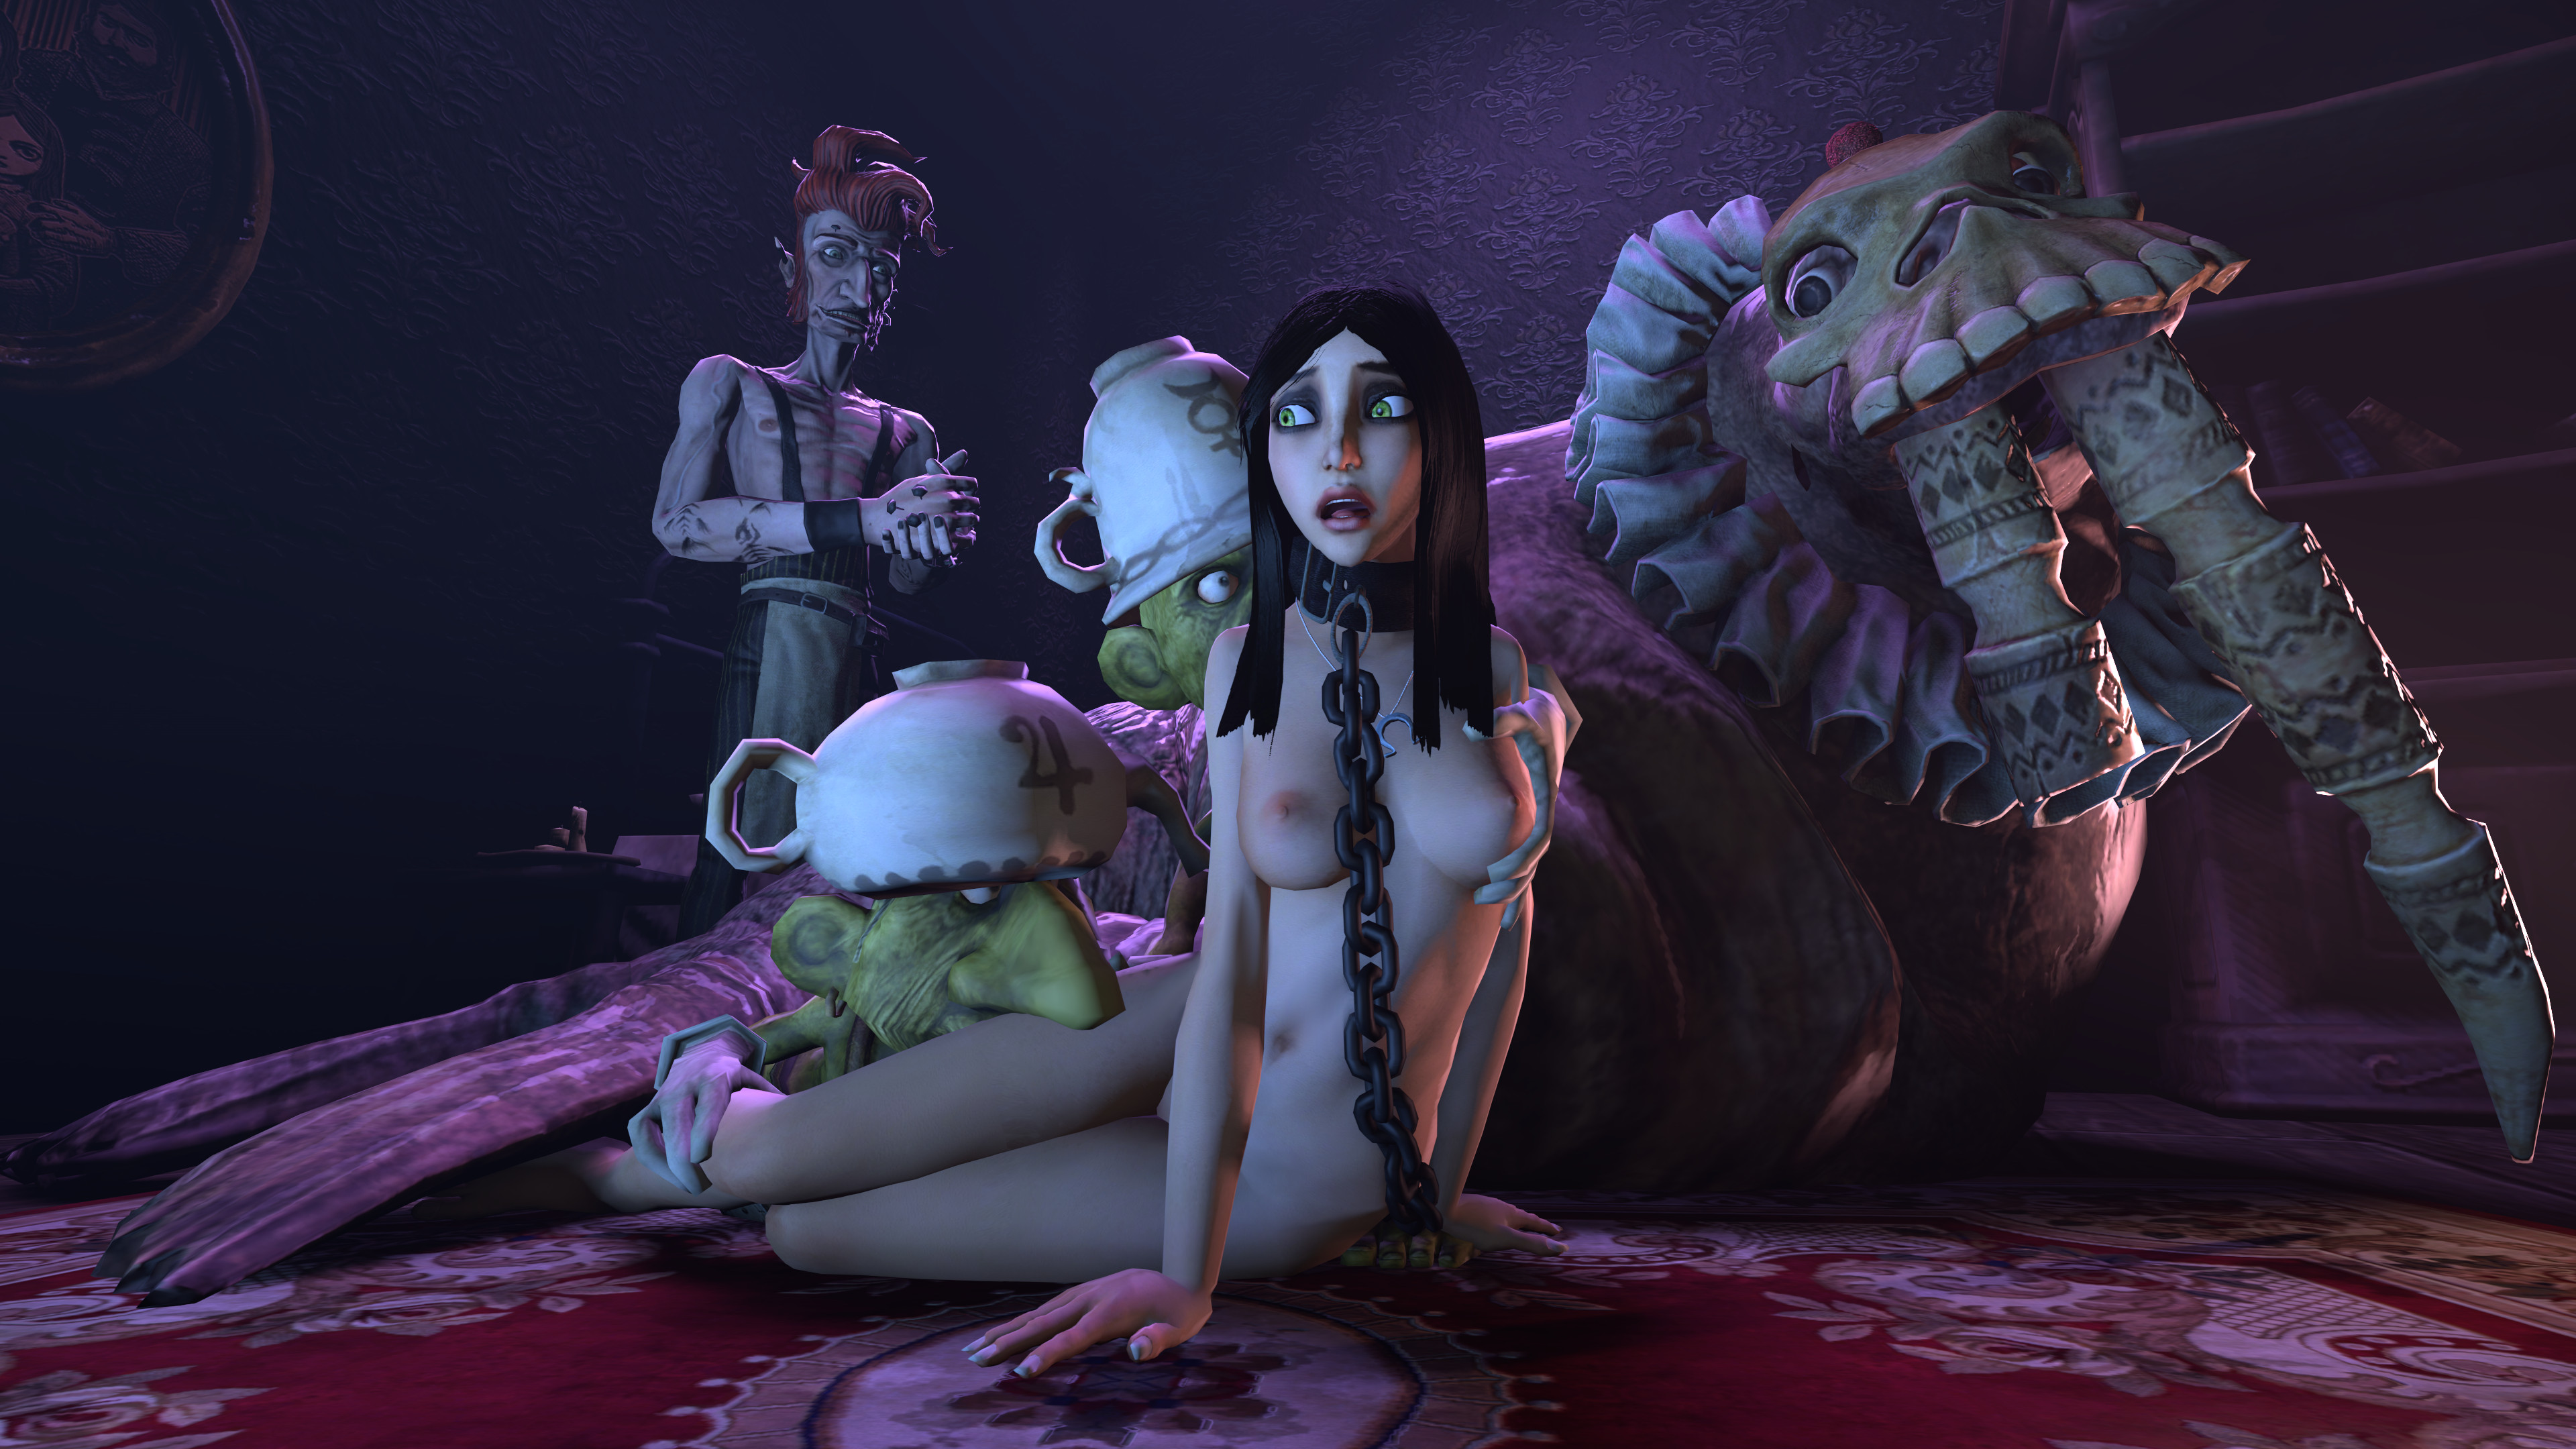 3840px x 2160px - Post 1687125: Alice_Liddell Alice_Madness_Returns American_McGee's_Alice